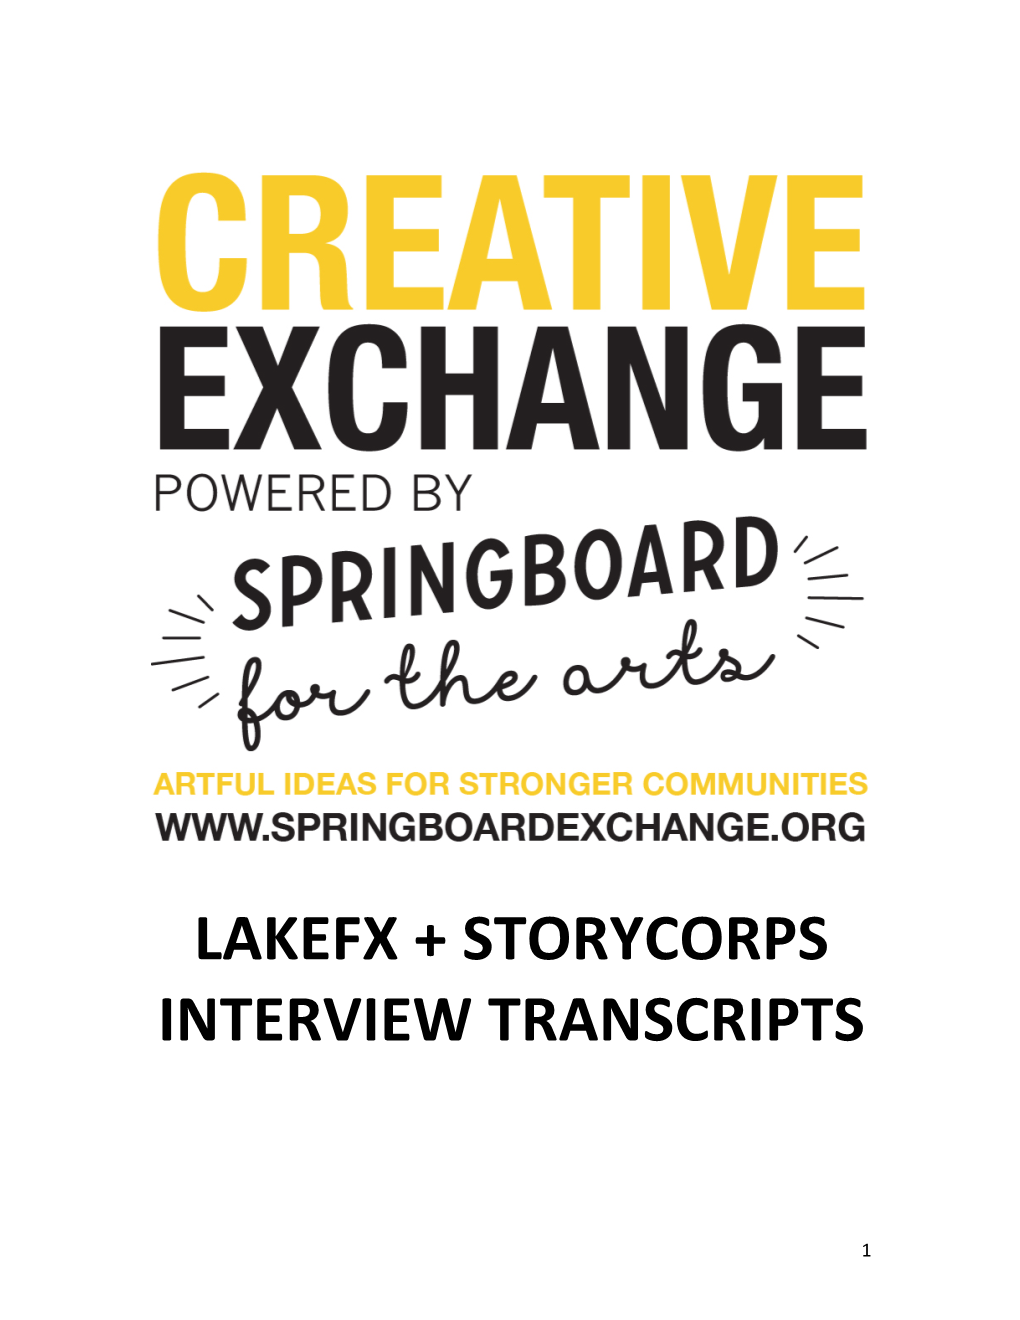 Lakefx + Storycorps Interview Transcripts